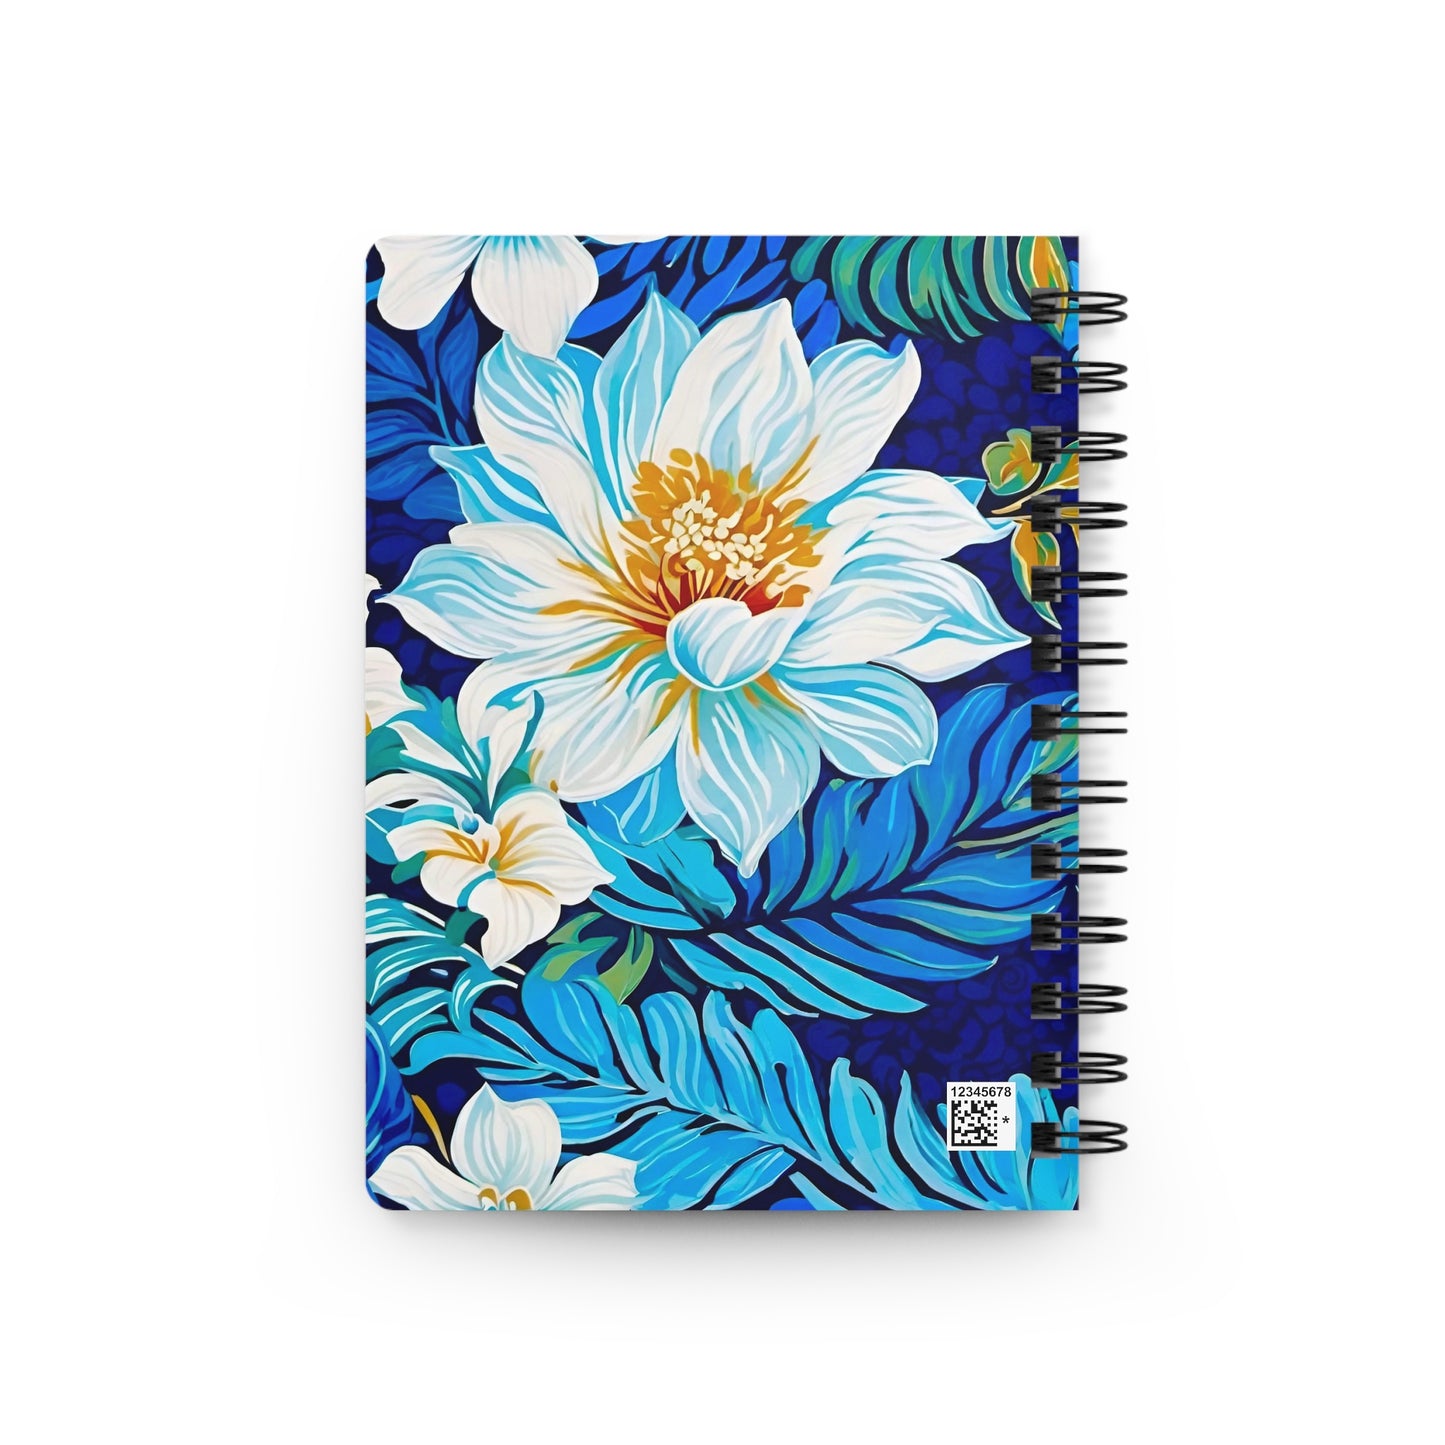 Hawaiian White Orchid Tropical Paradise Luau Writing Sketch Inspiration Travel Spiral Bound Journal